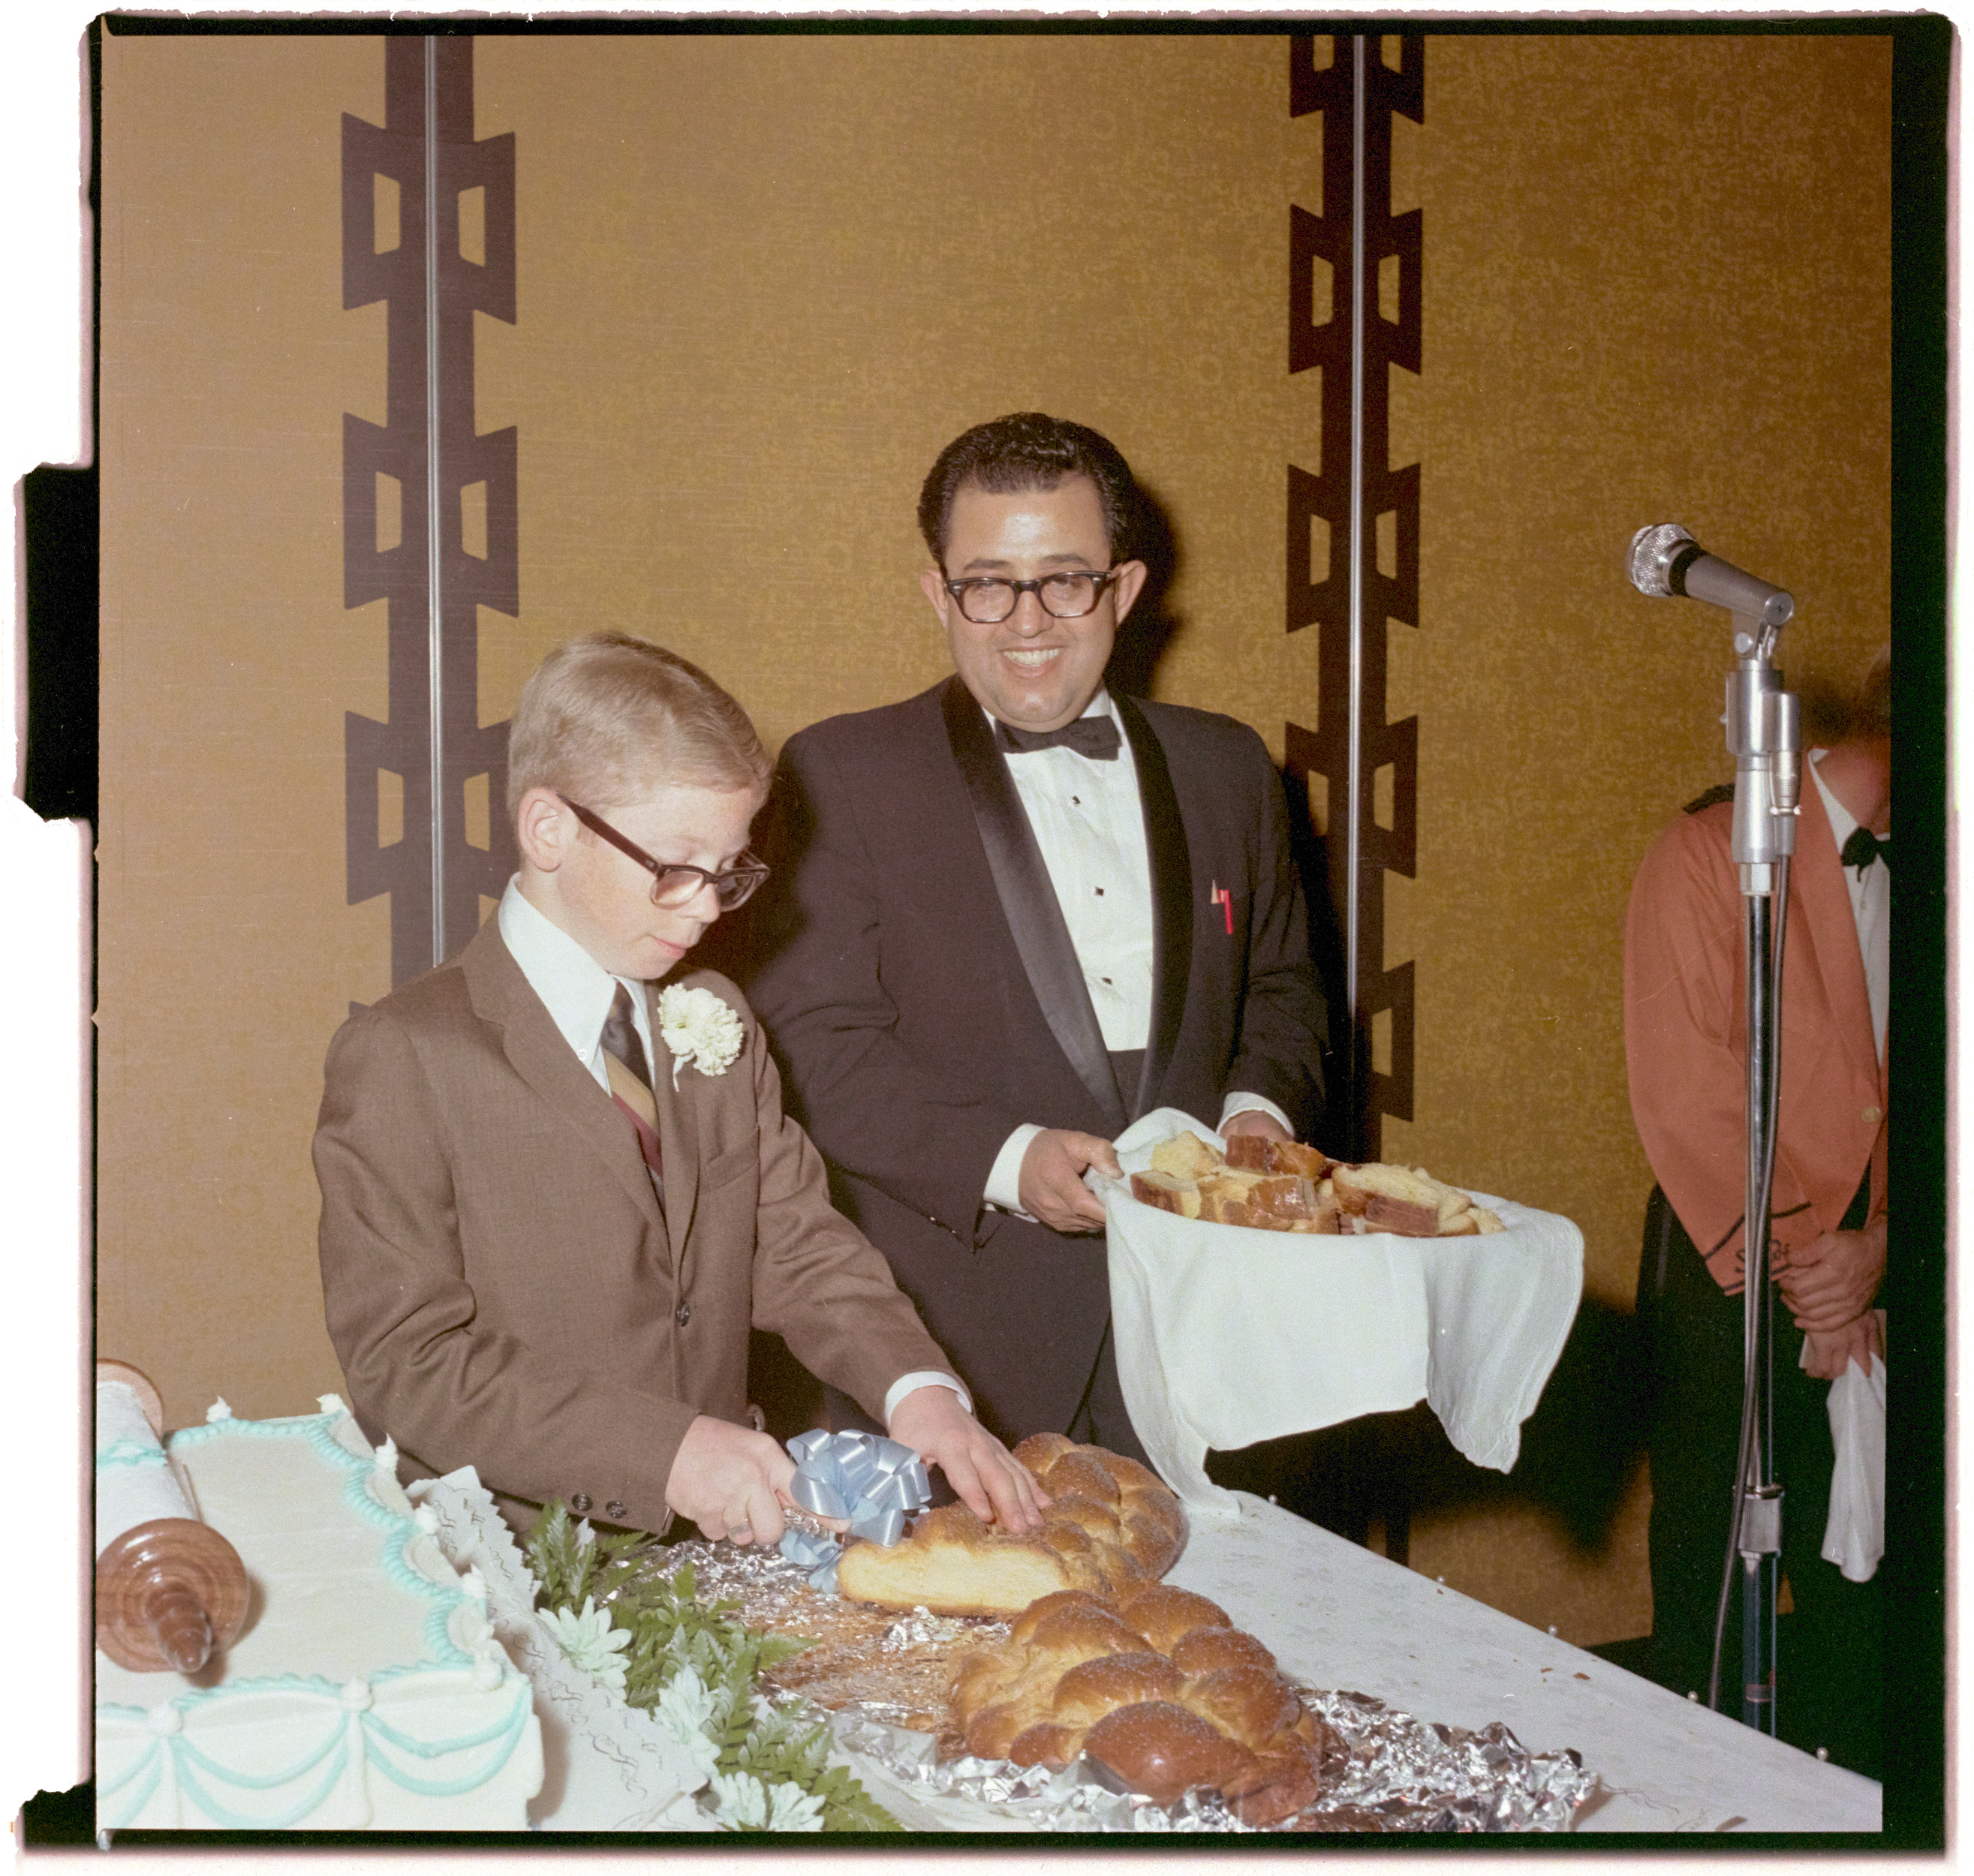 Photographs of Andrew Levy Bar Mitzvah, image 01